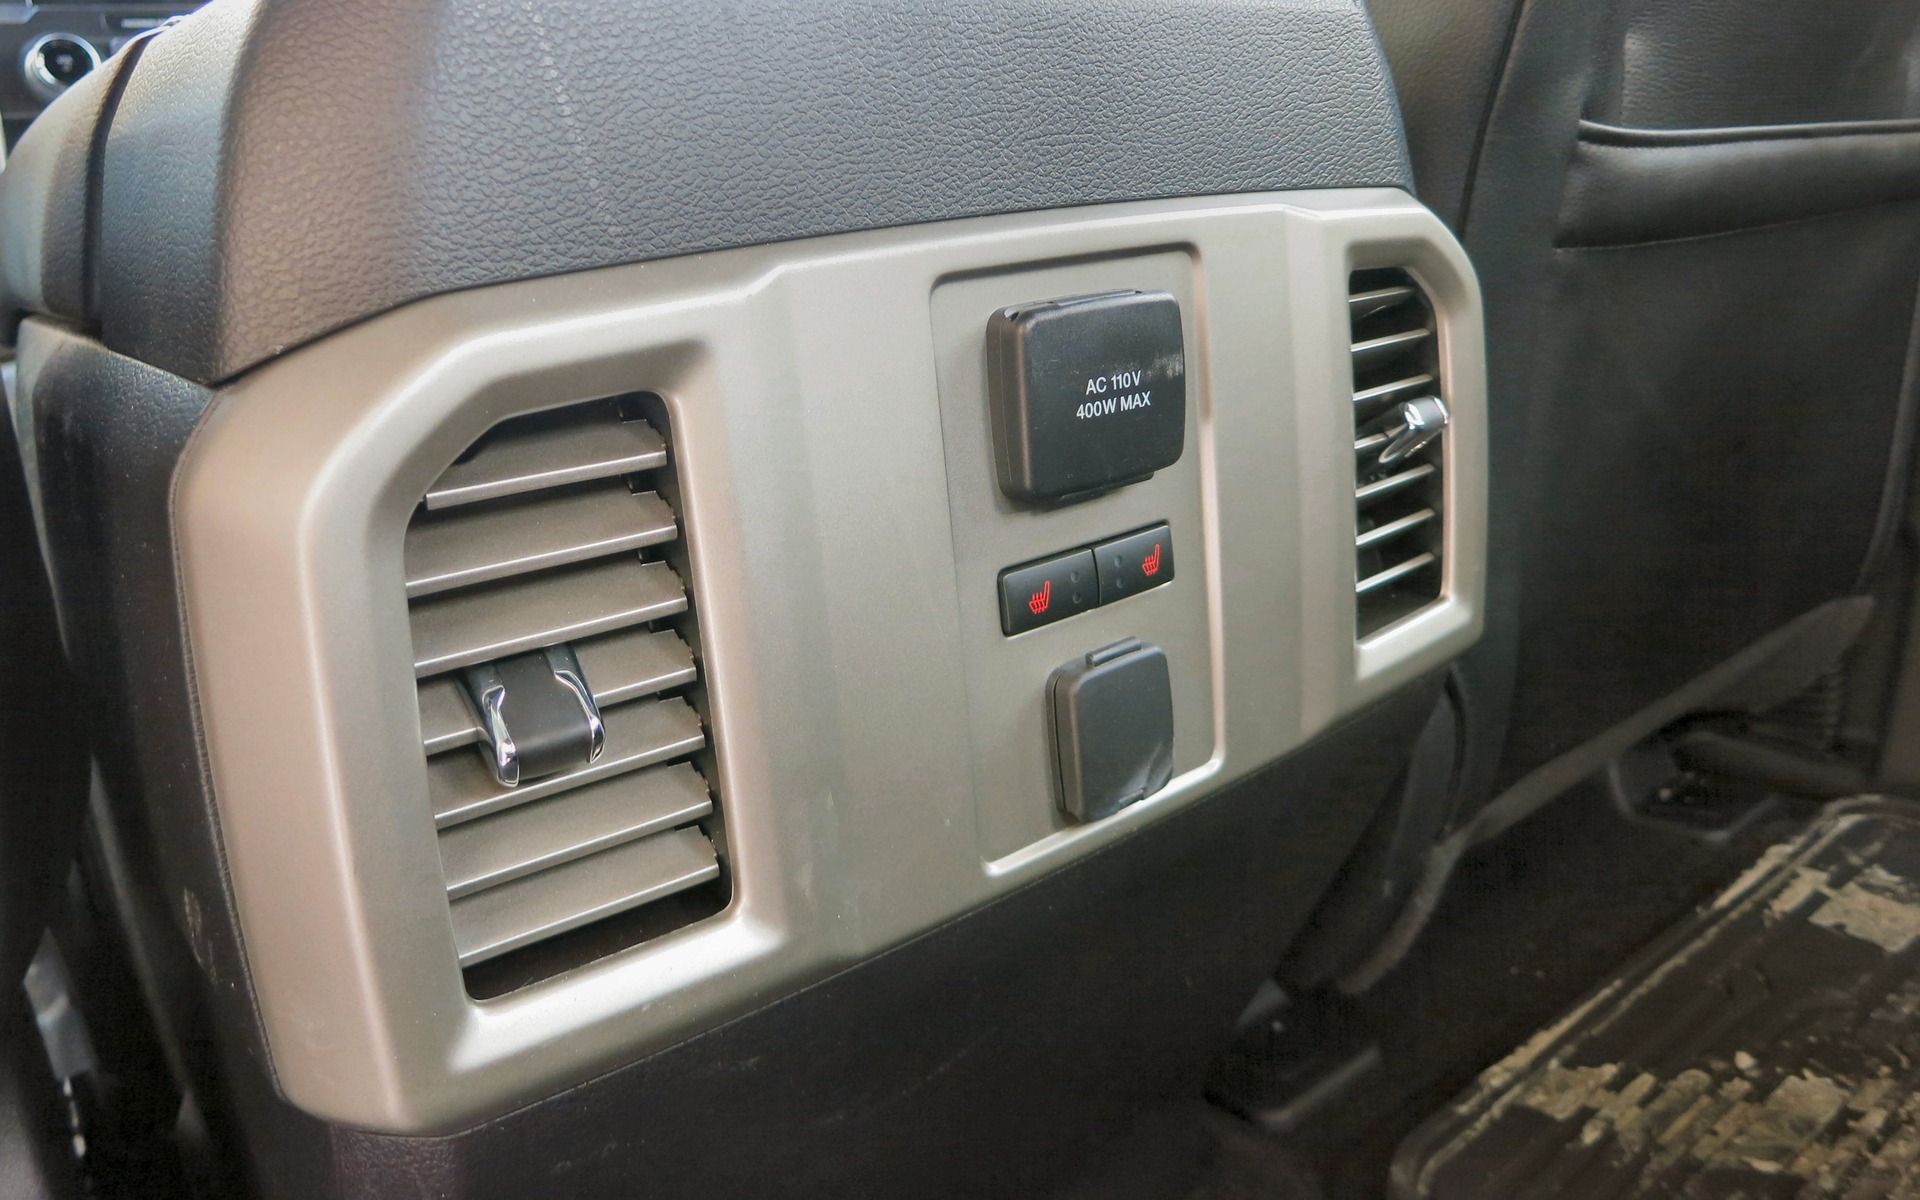 Power outlets and heated seats greet rear passengers.